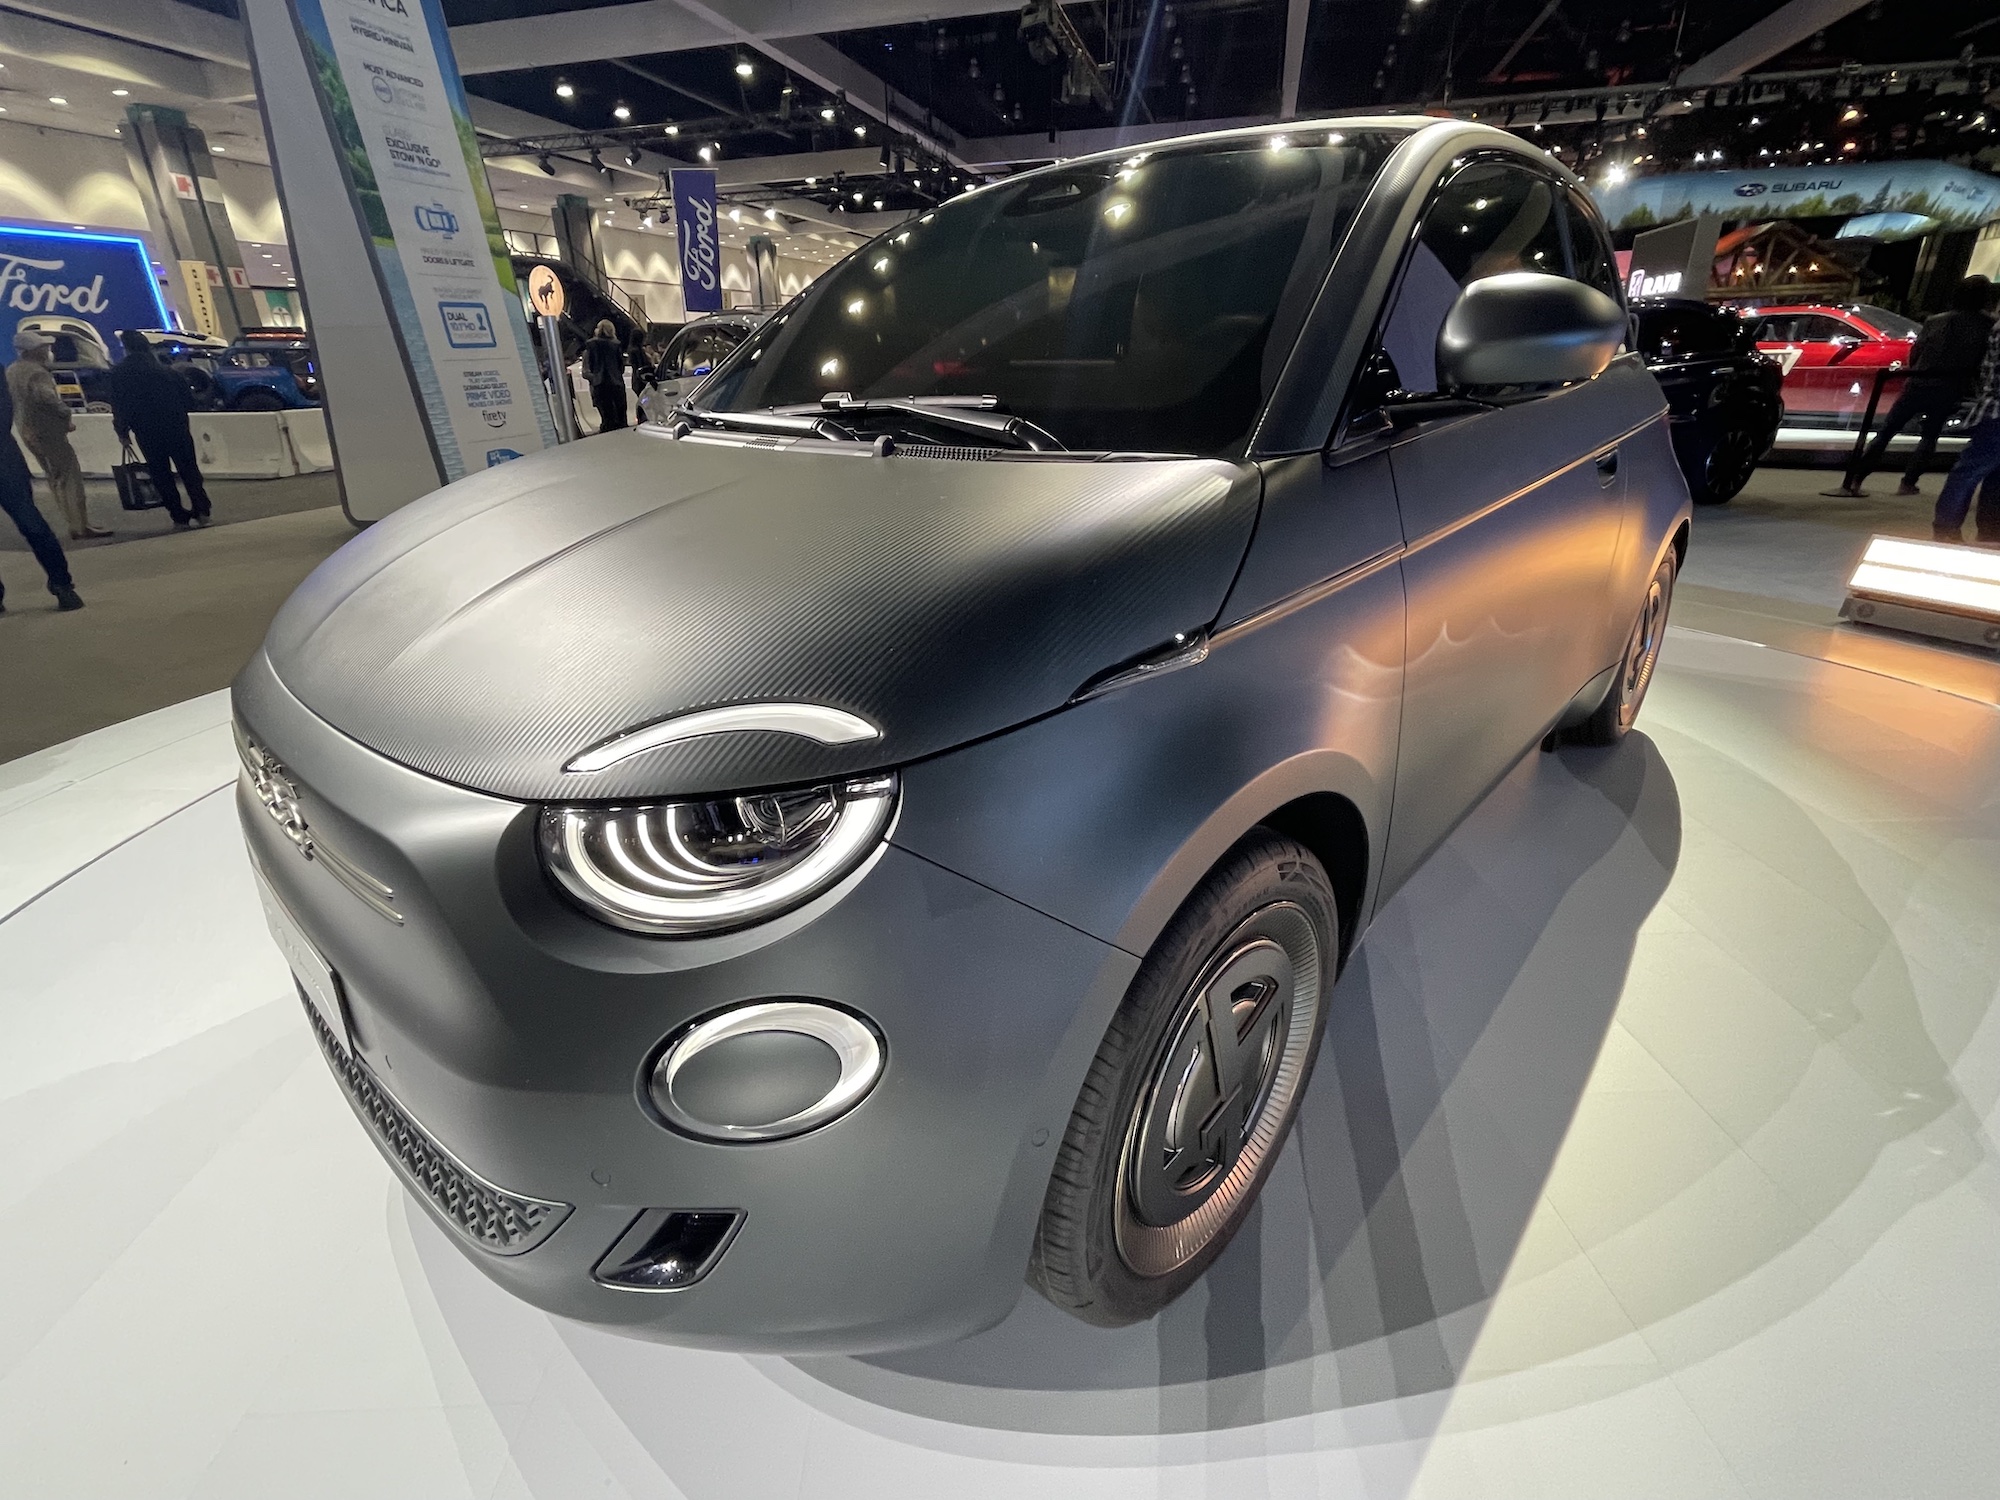 Stellantis is bringing its new allelectric Fiat 500e to North America